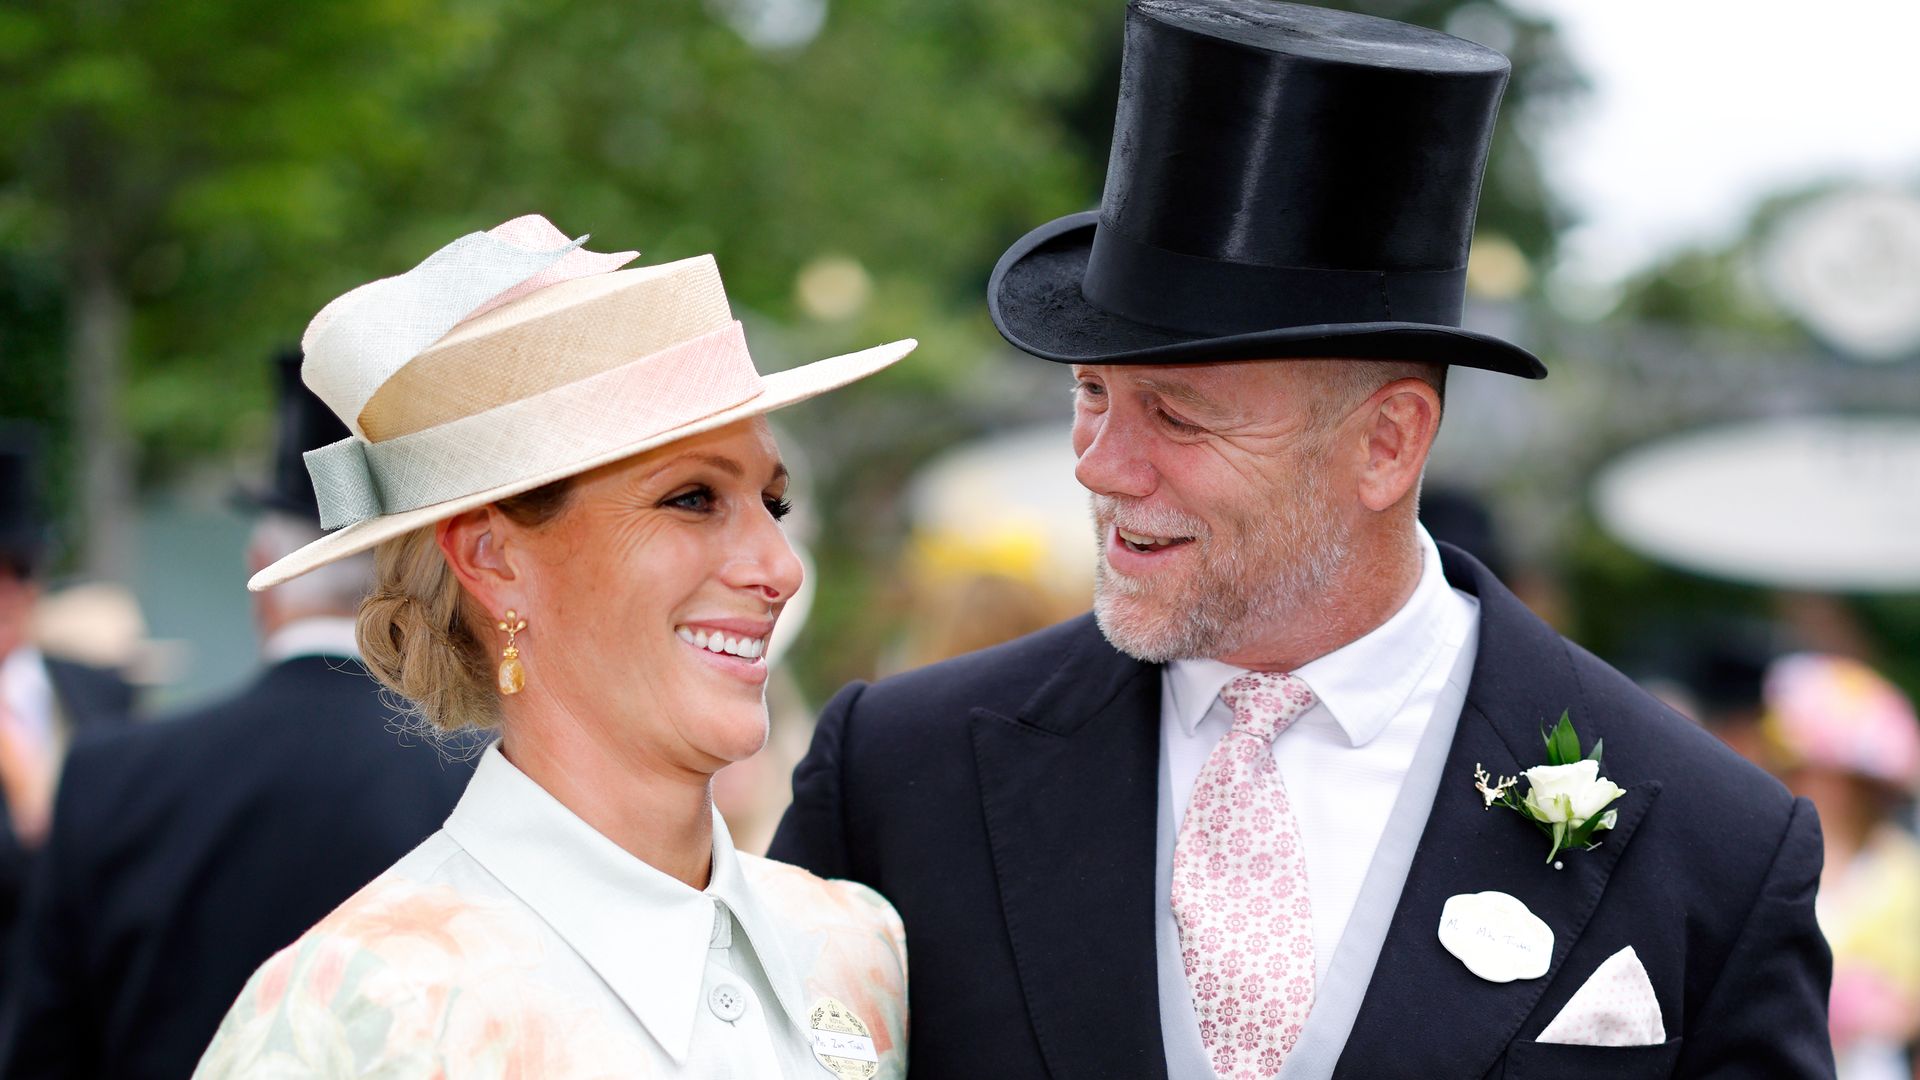 Zara Tindall and Mike Tindall attend day one of Royal Ascot 2023 